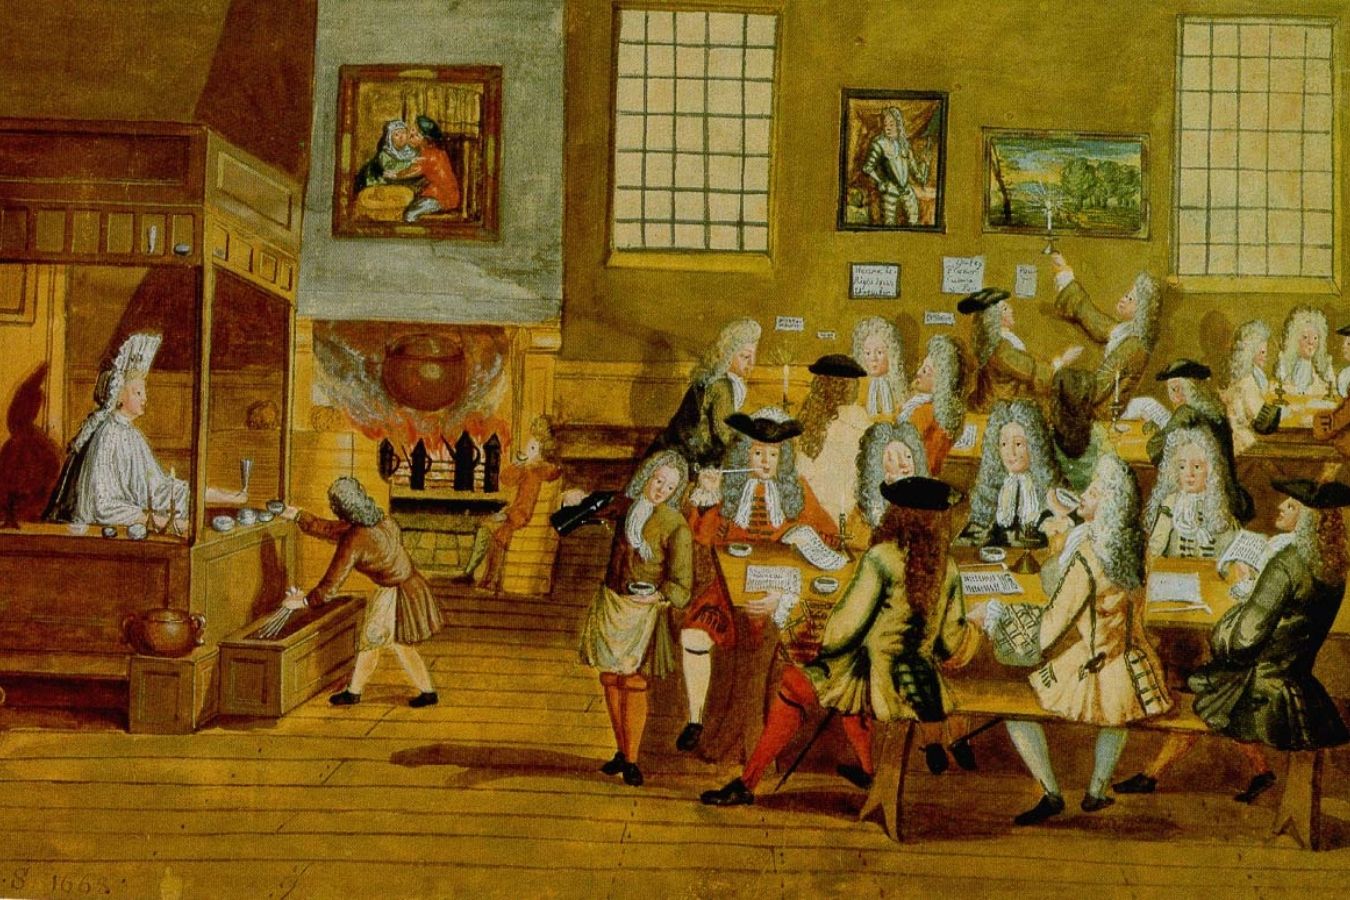 The First Cafes - The History Of Cafes